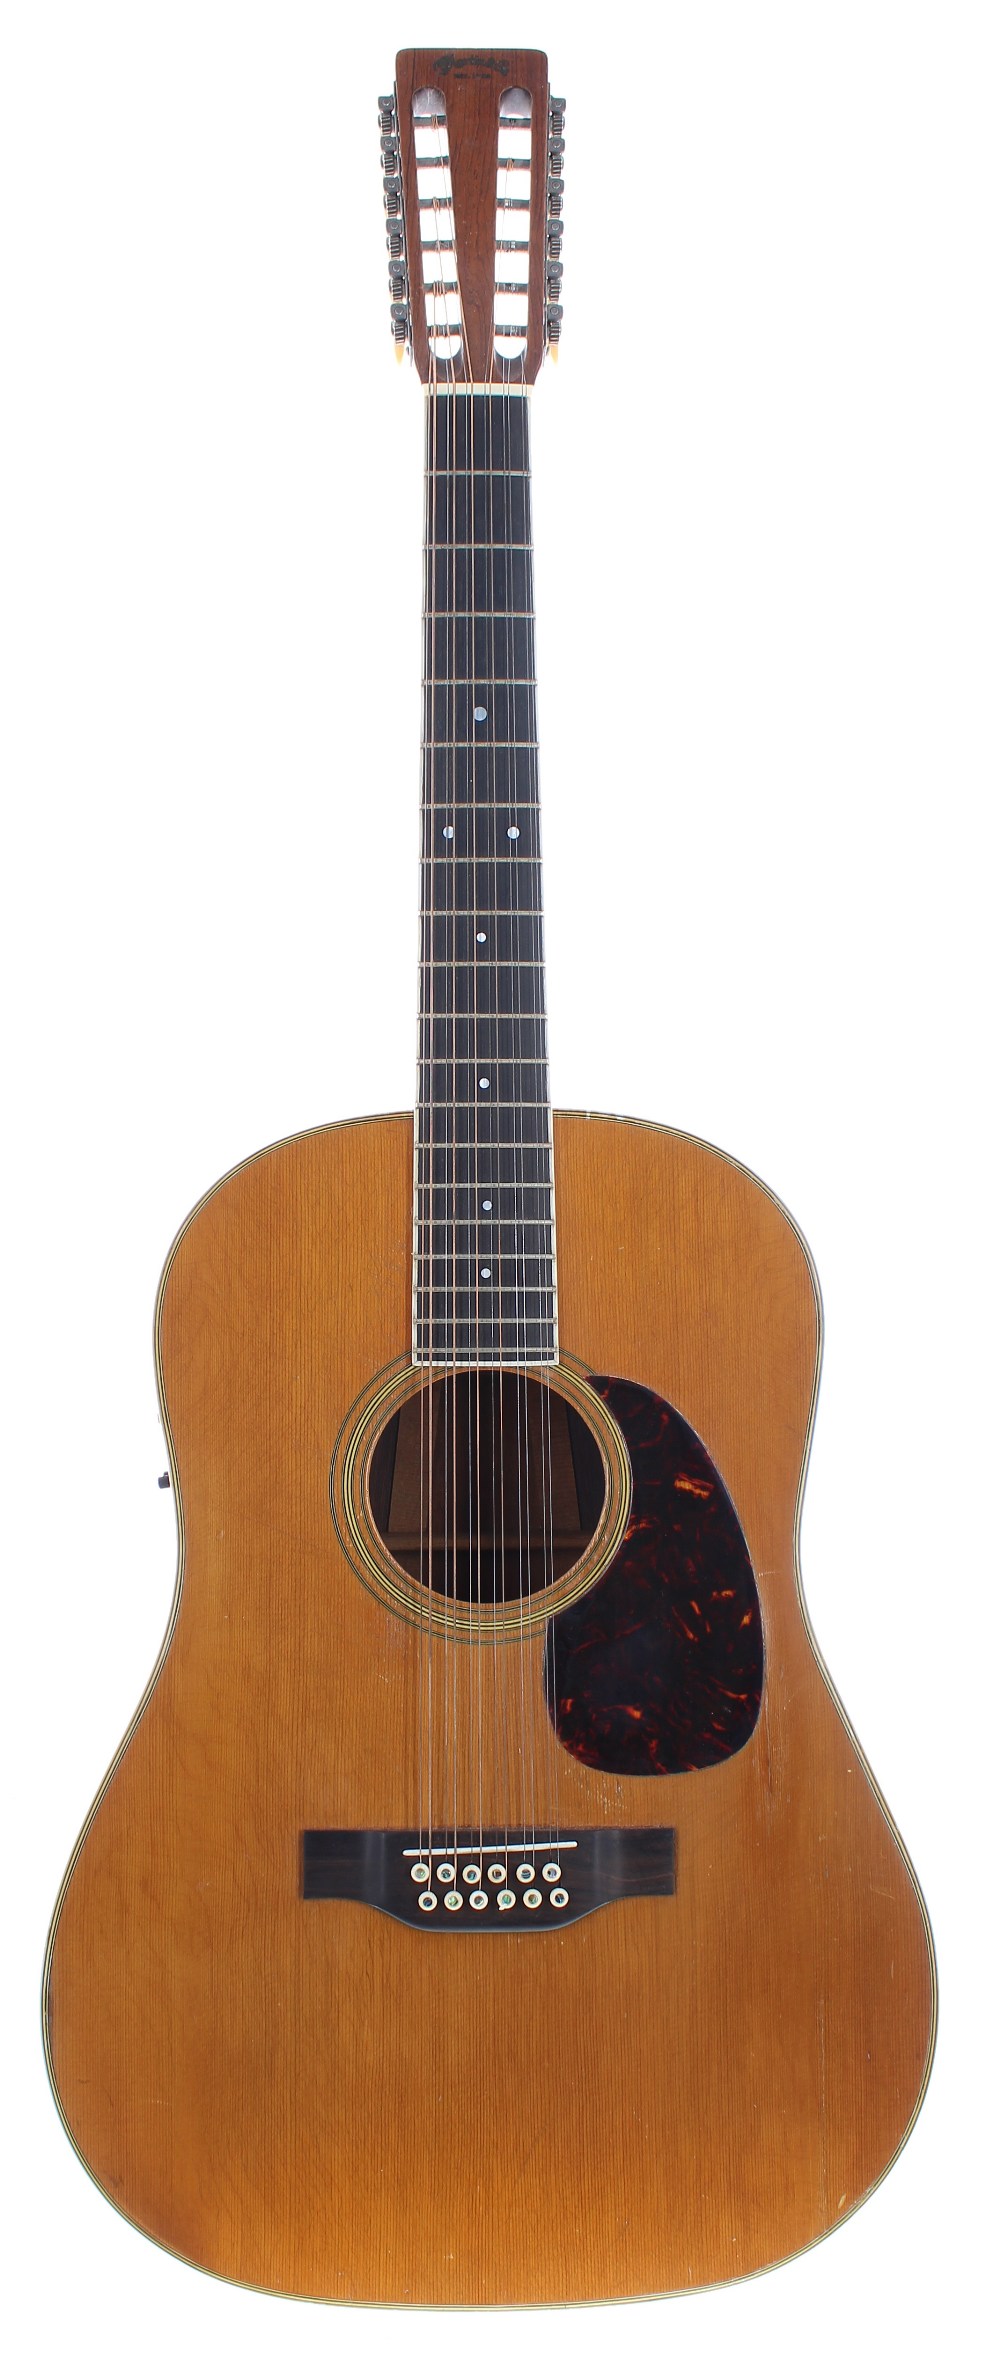 1966 C.F. Martin & Co D12-35 twelve string guitar, made in USA, ser. no. 2xxxx6; Back and sides: